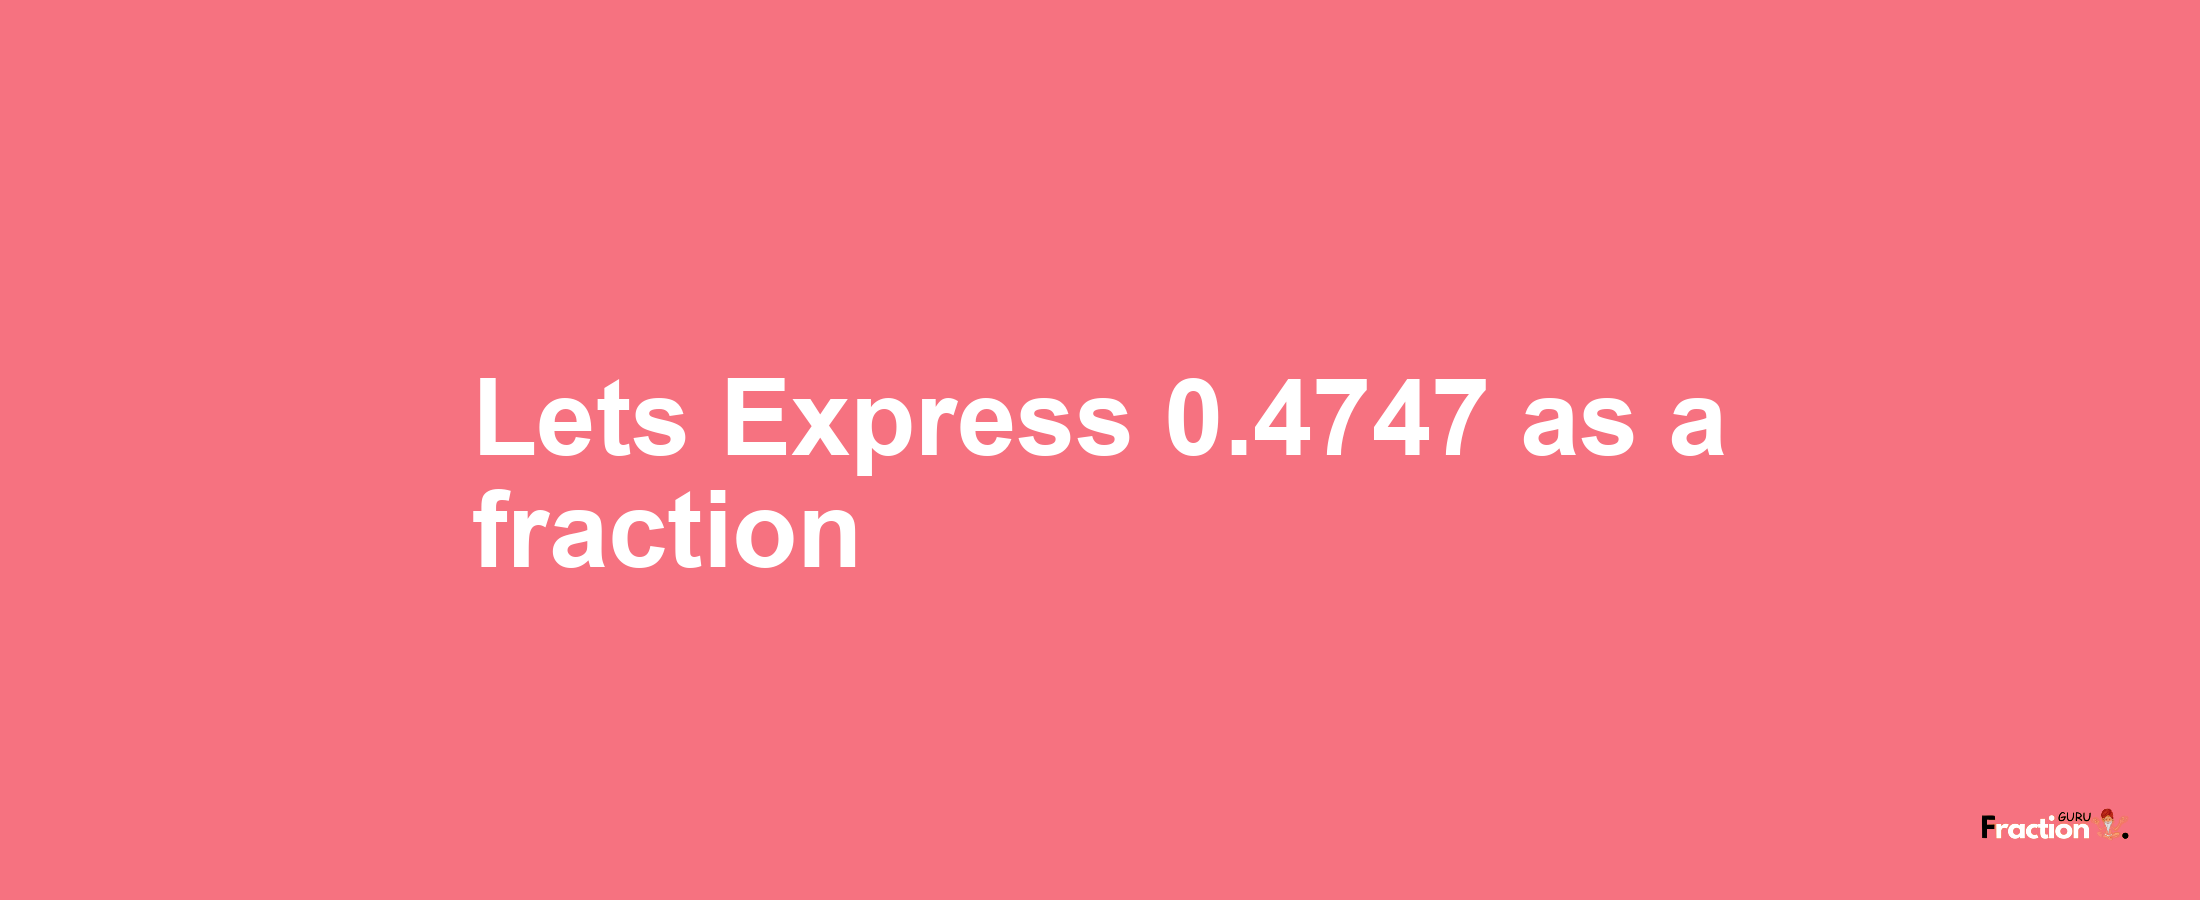 Lets Express 0.4747 as afraction